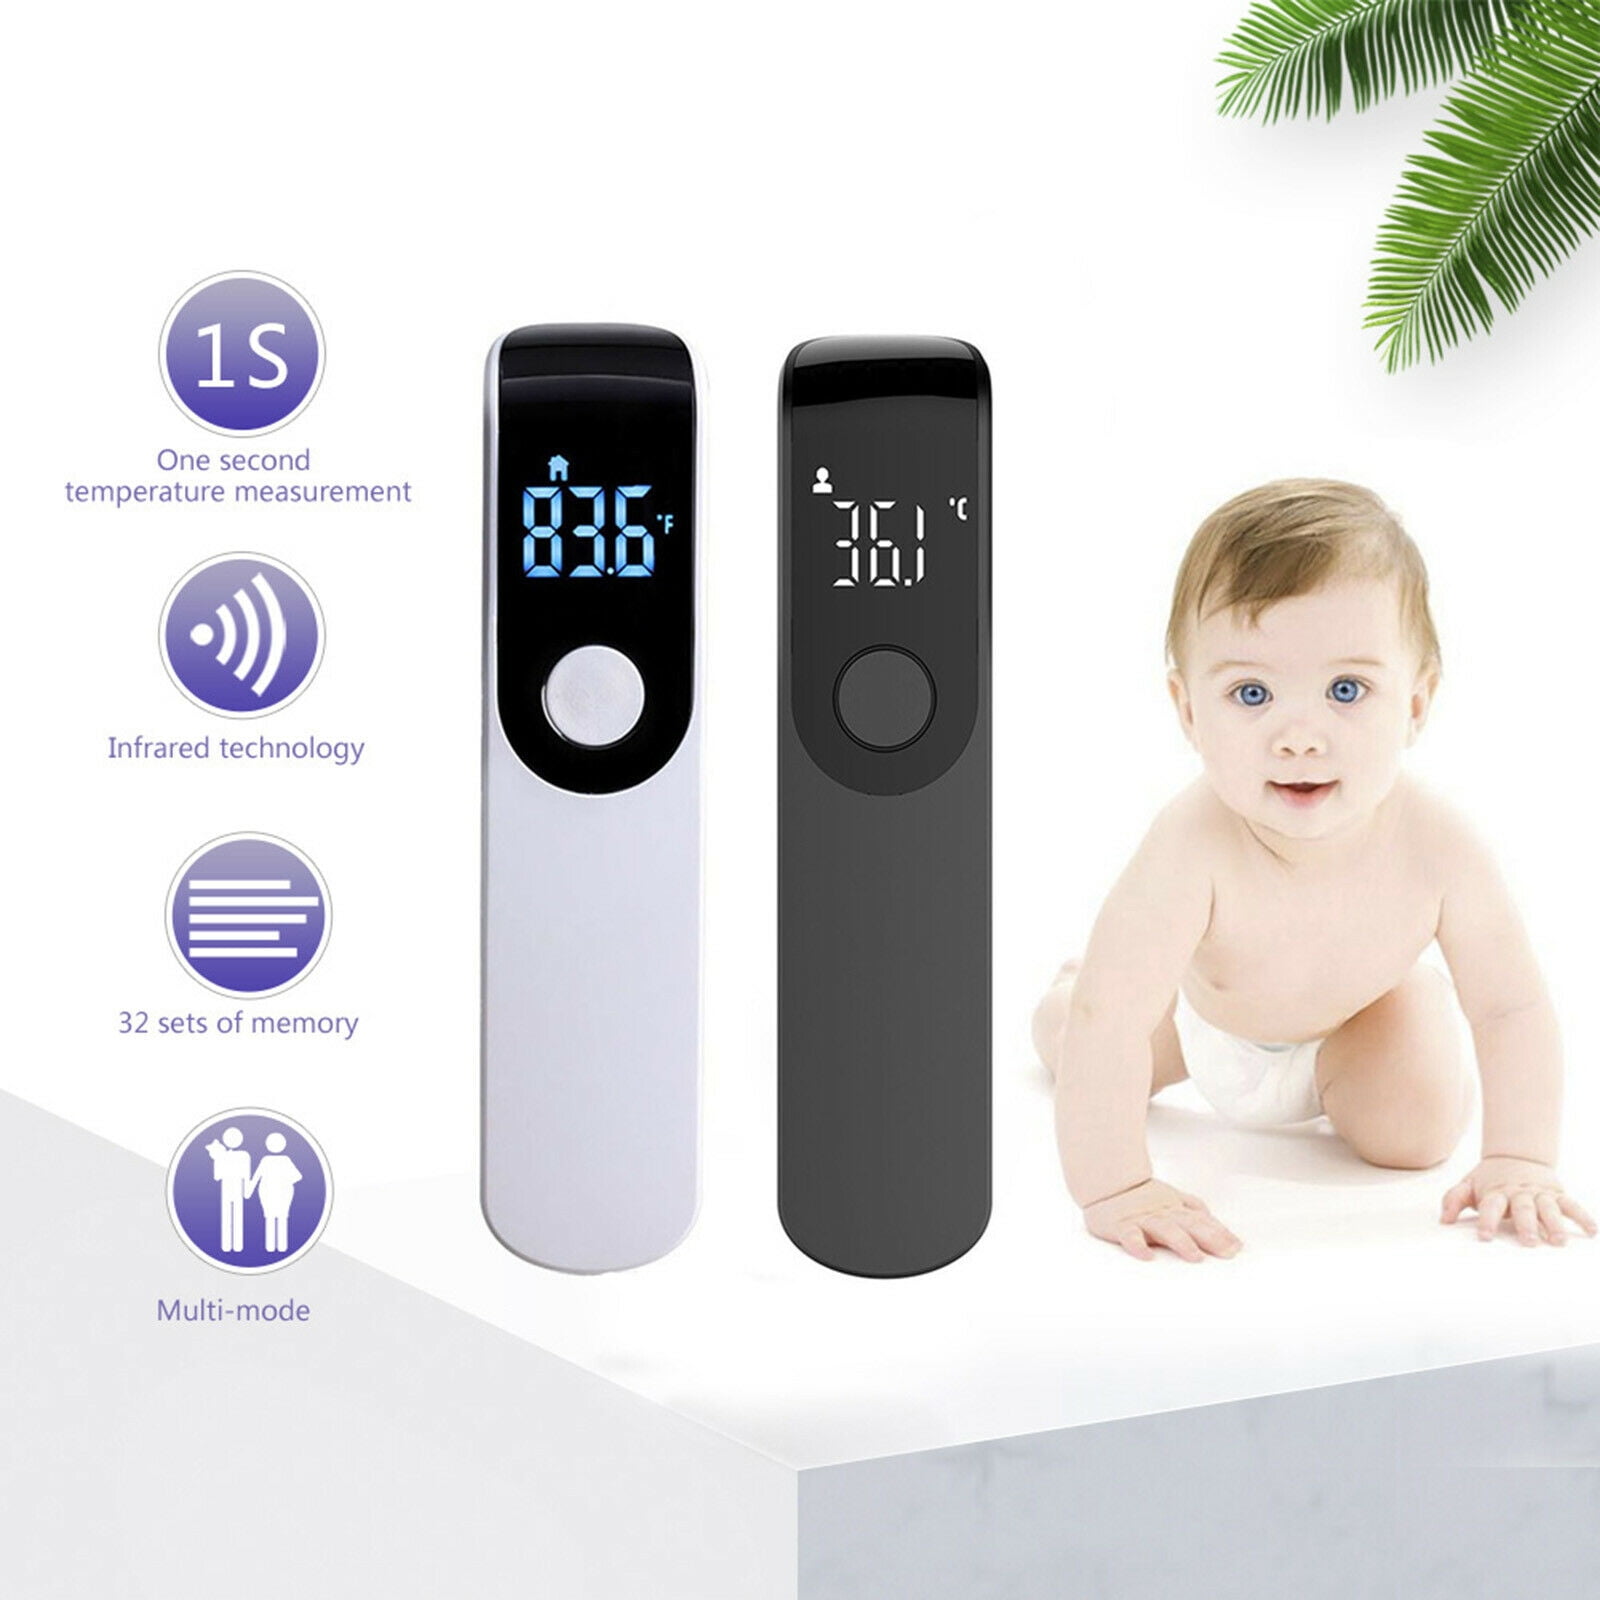 Dreambeauty Digital Forehead Thermometers Non-Contact Infrared Forehead Thermometer with LCD Display No Touch Accurate Instant Readings Kids Baby Adults